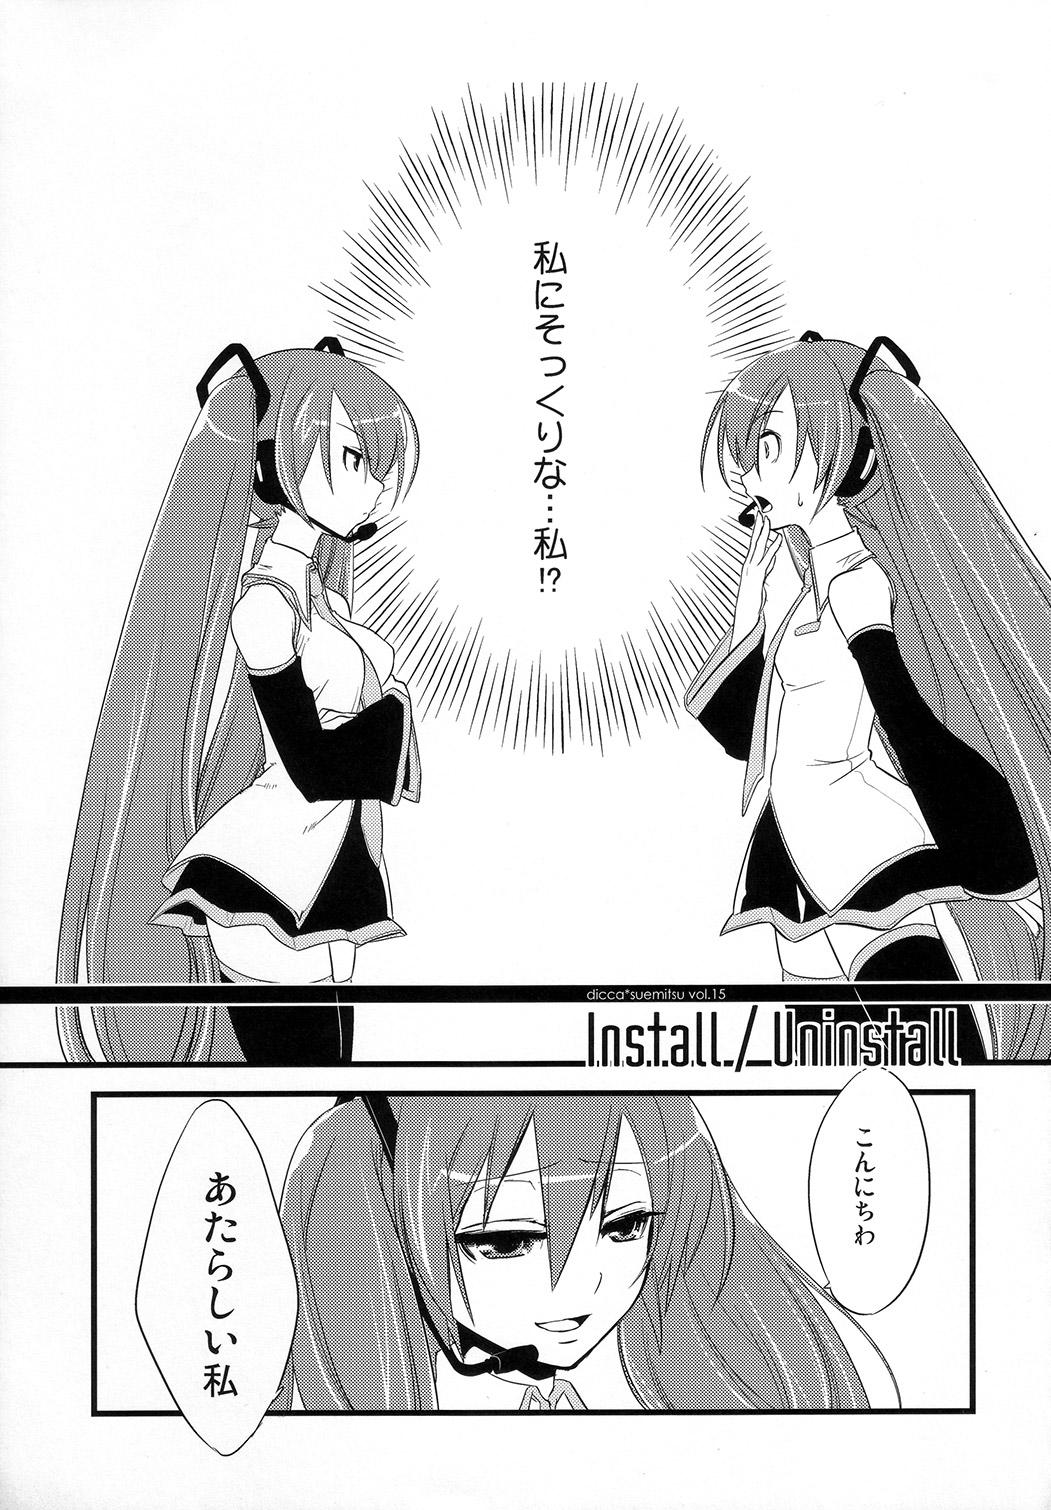 Gay Fuck Install/Uninstall - Vocaloid Spreading - Page 10